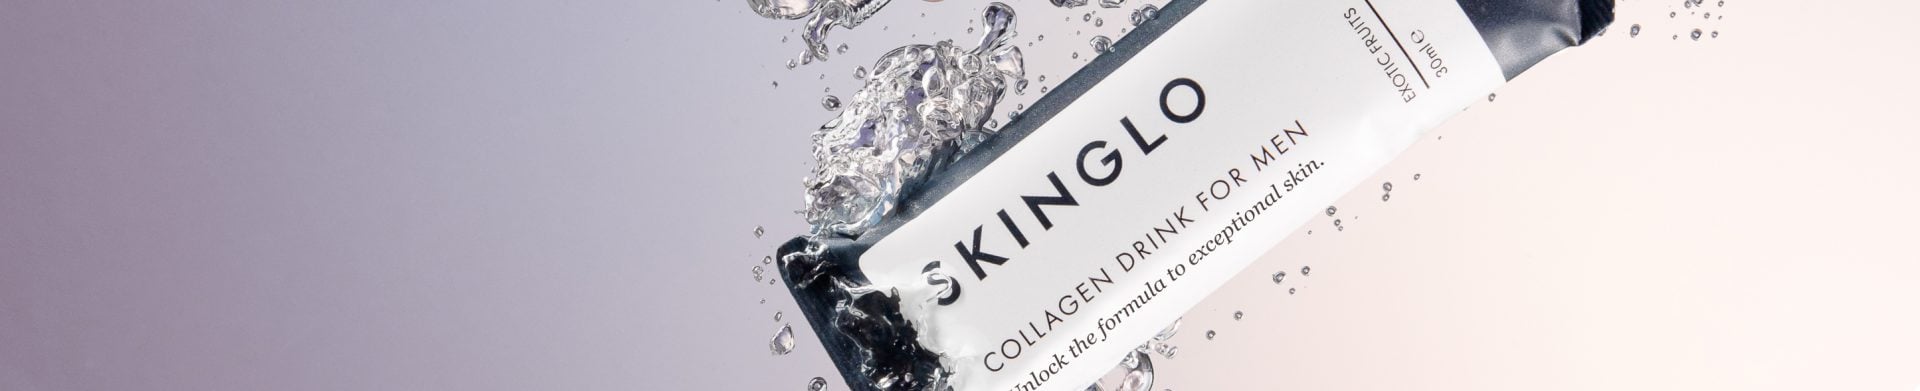 What is SKINGLO?